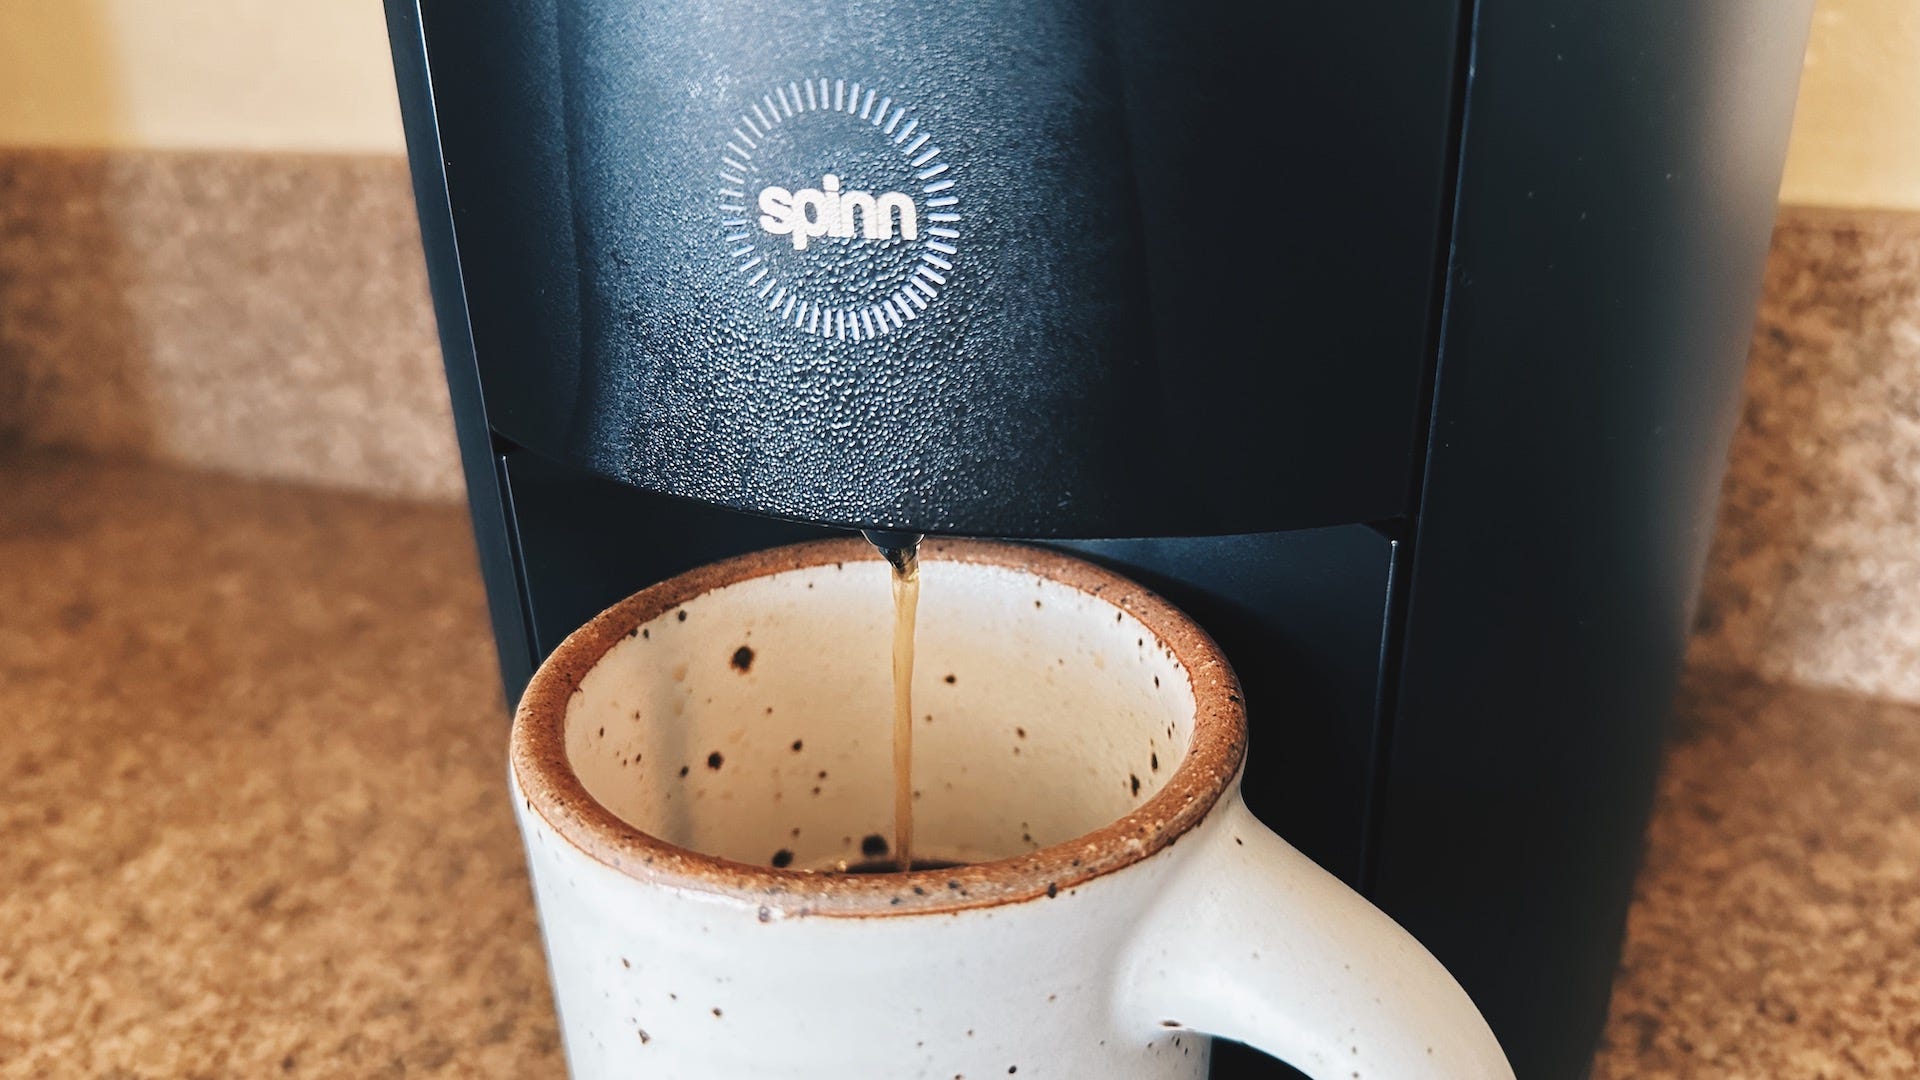 Showing coffee from Spinn dripping into a mug